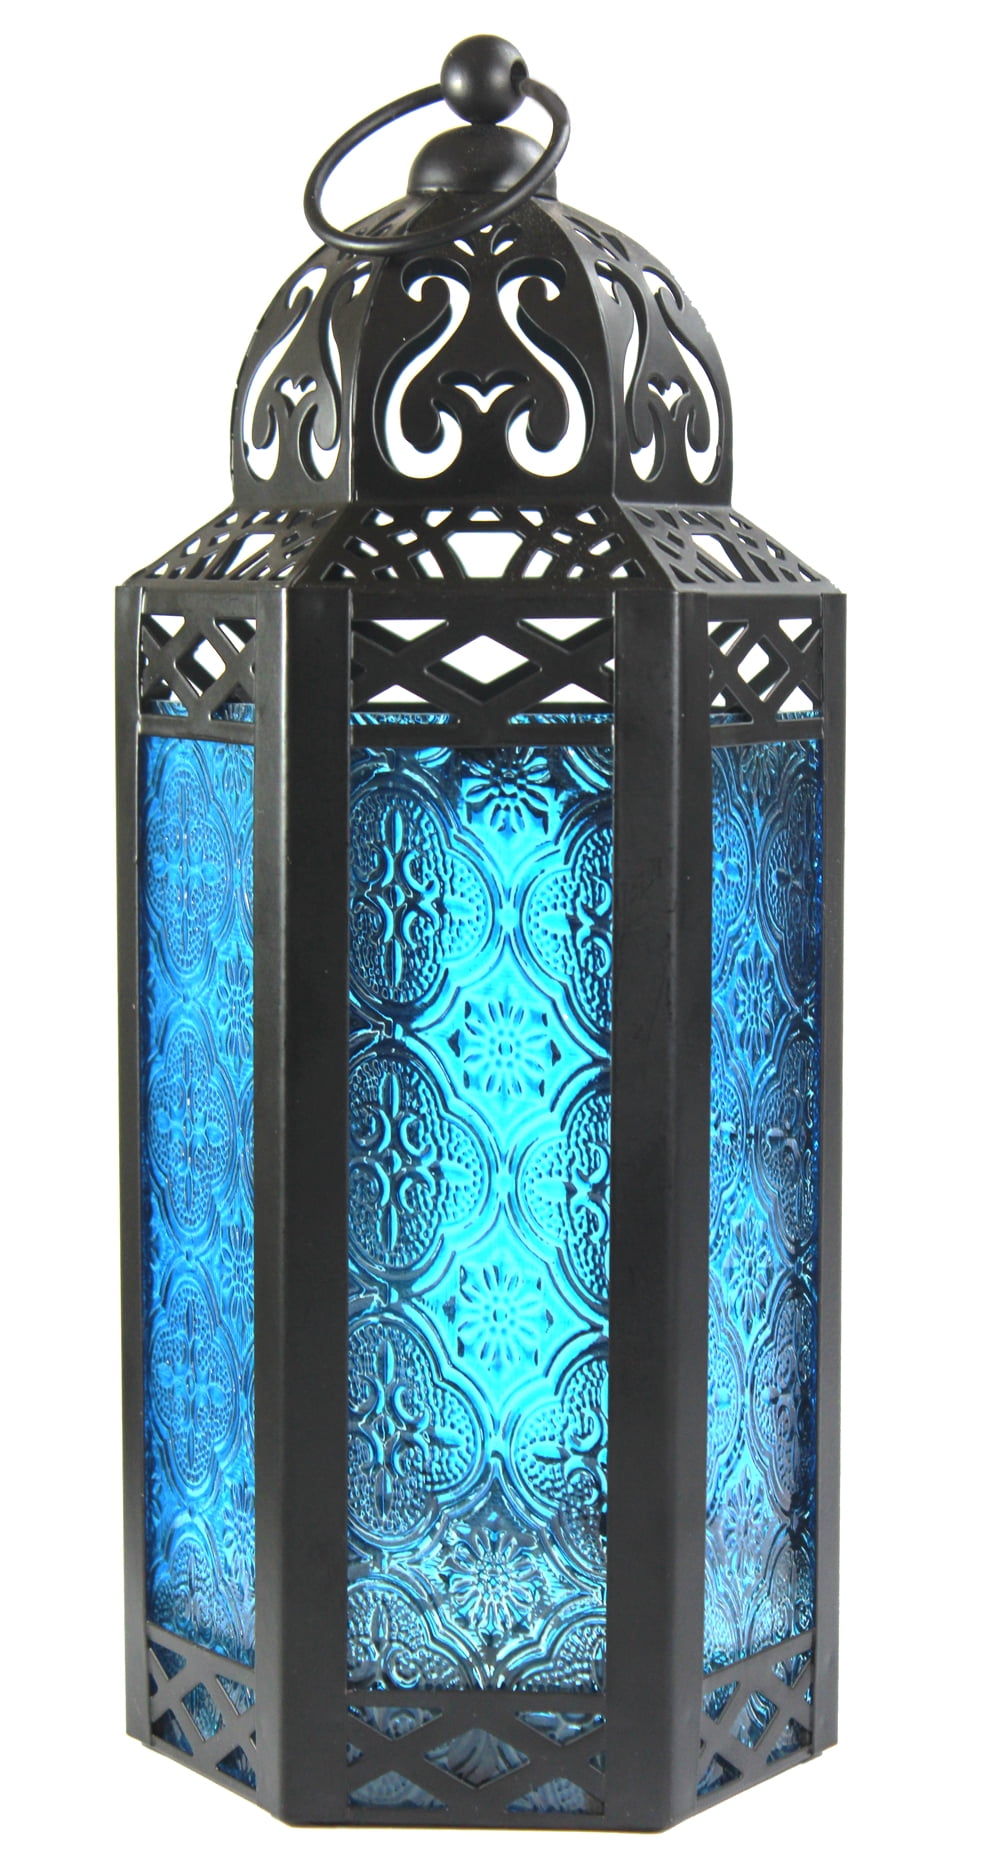 Glass Crackled Moroccan Style Tealight Holder Lantern Candle Lighting Blue 